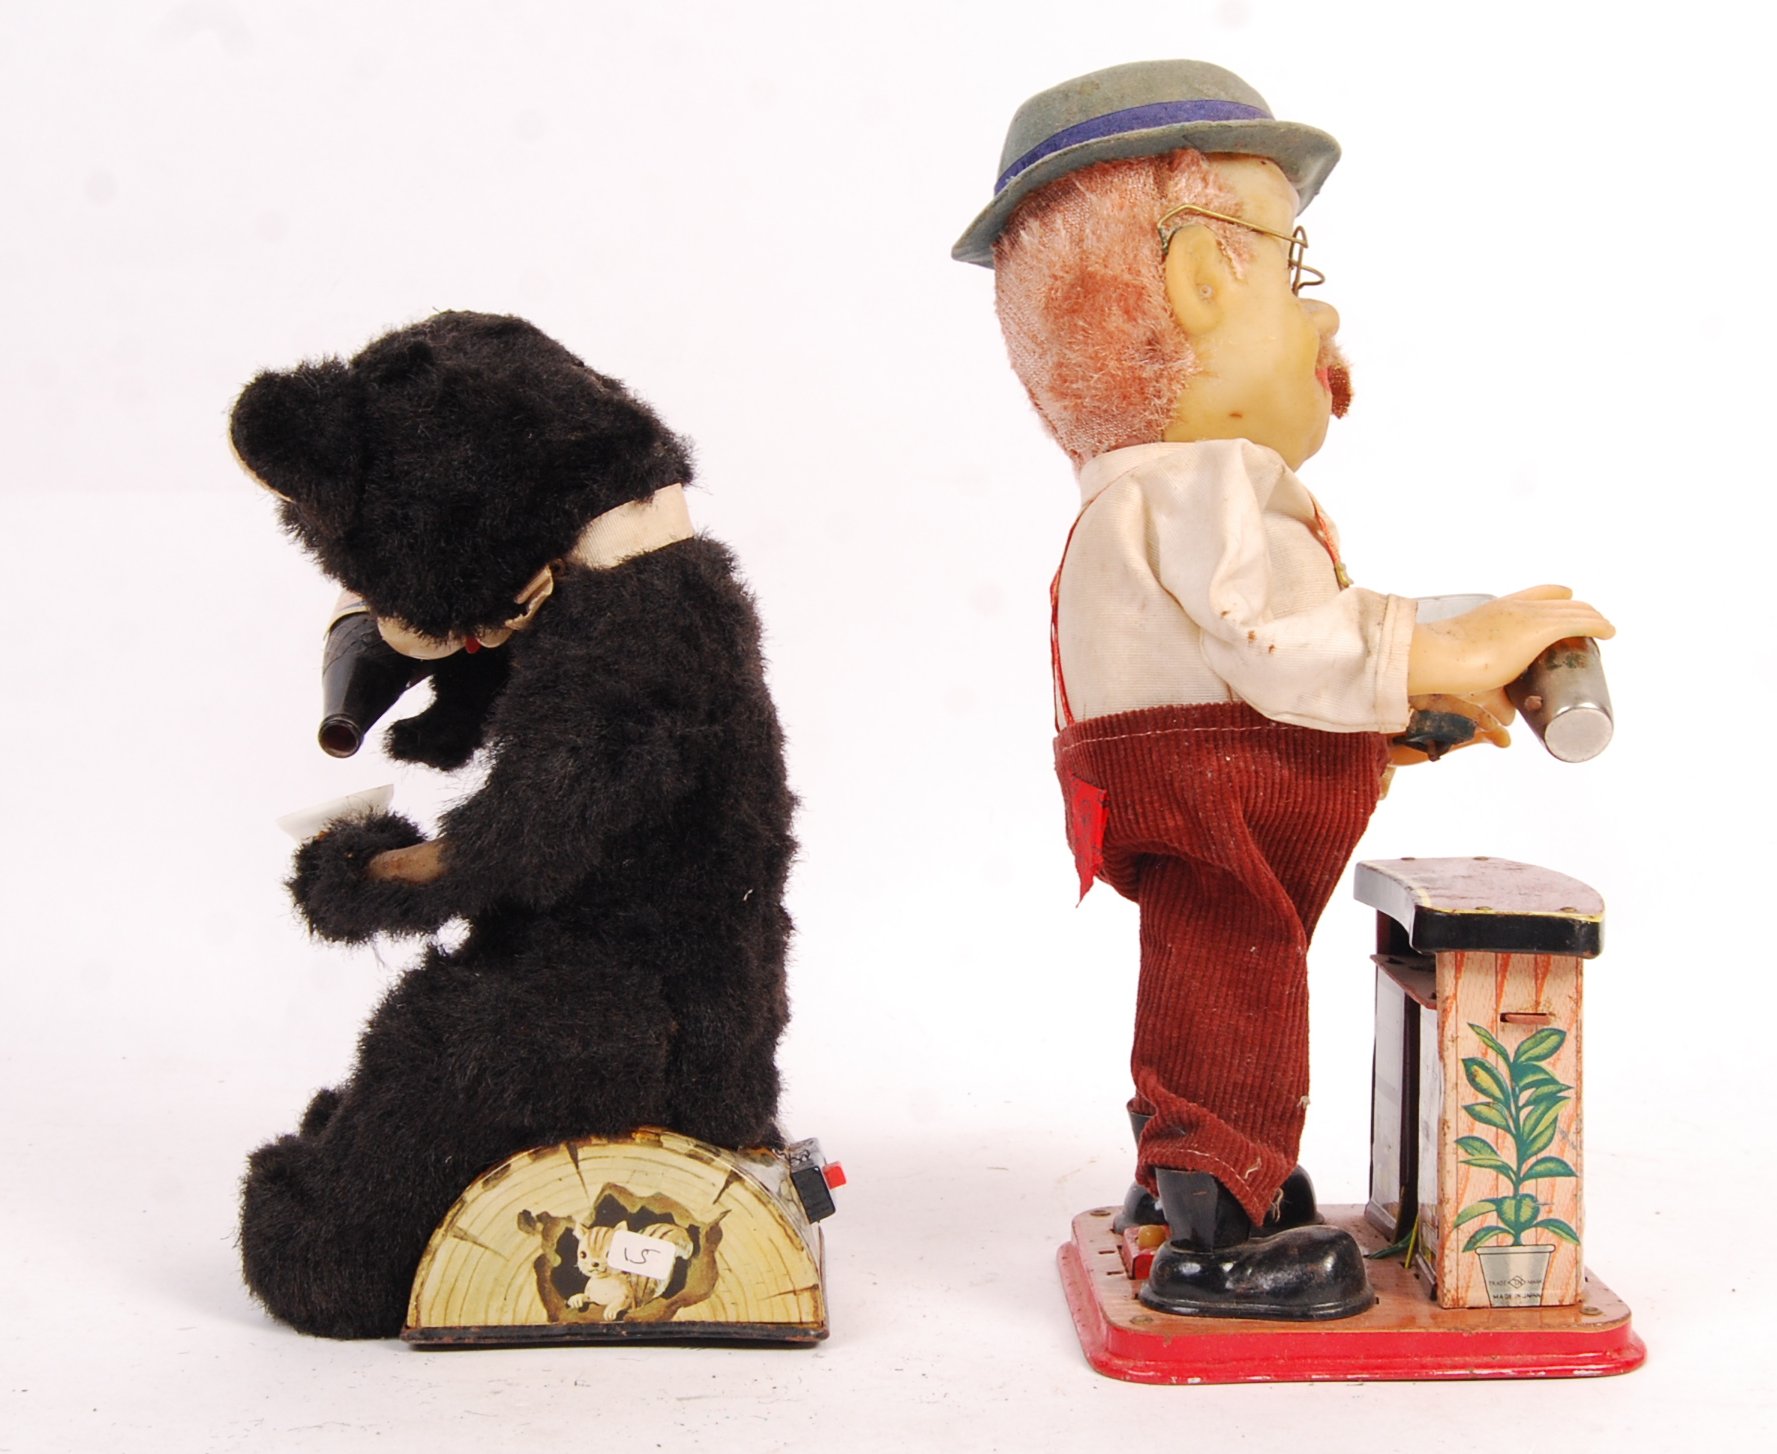 TWO RARE VINTAGE 1950'S TINPLATE MECHANICAL TOYS - Image 2 of 5